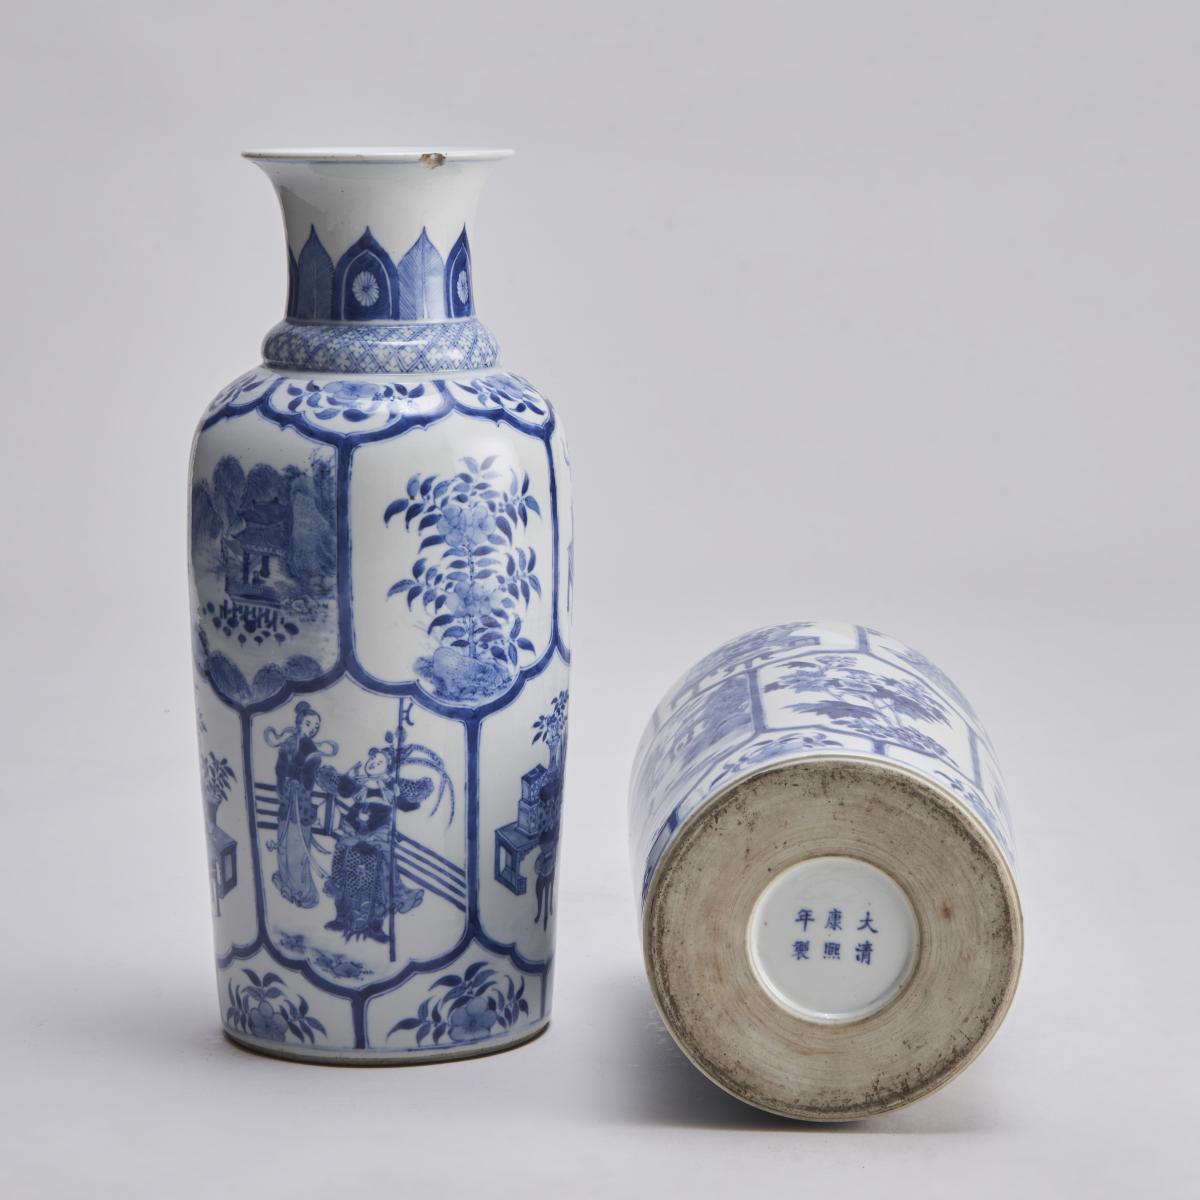 Nineteenth Century Chinese blue and white baluster form vases (Circa 1870)